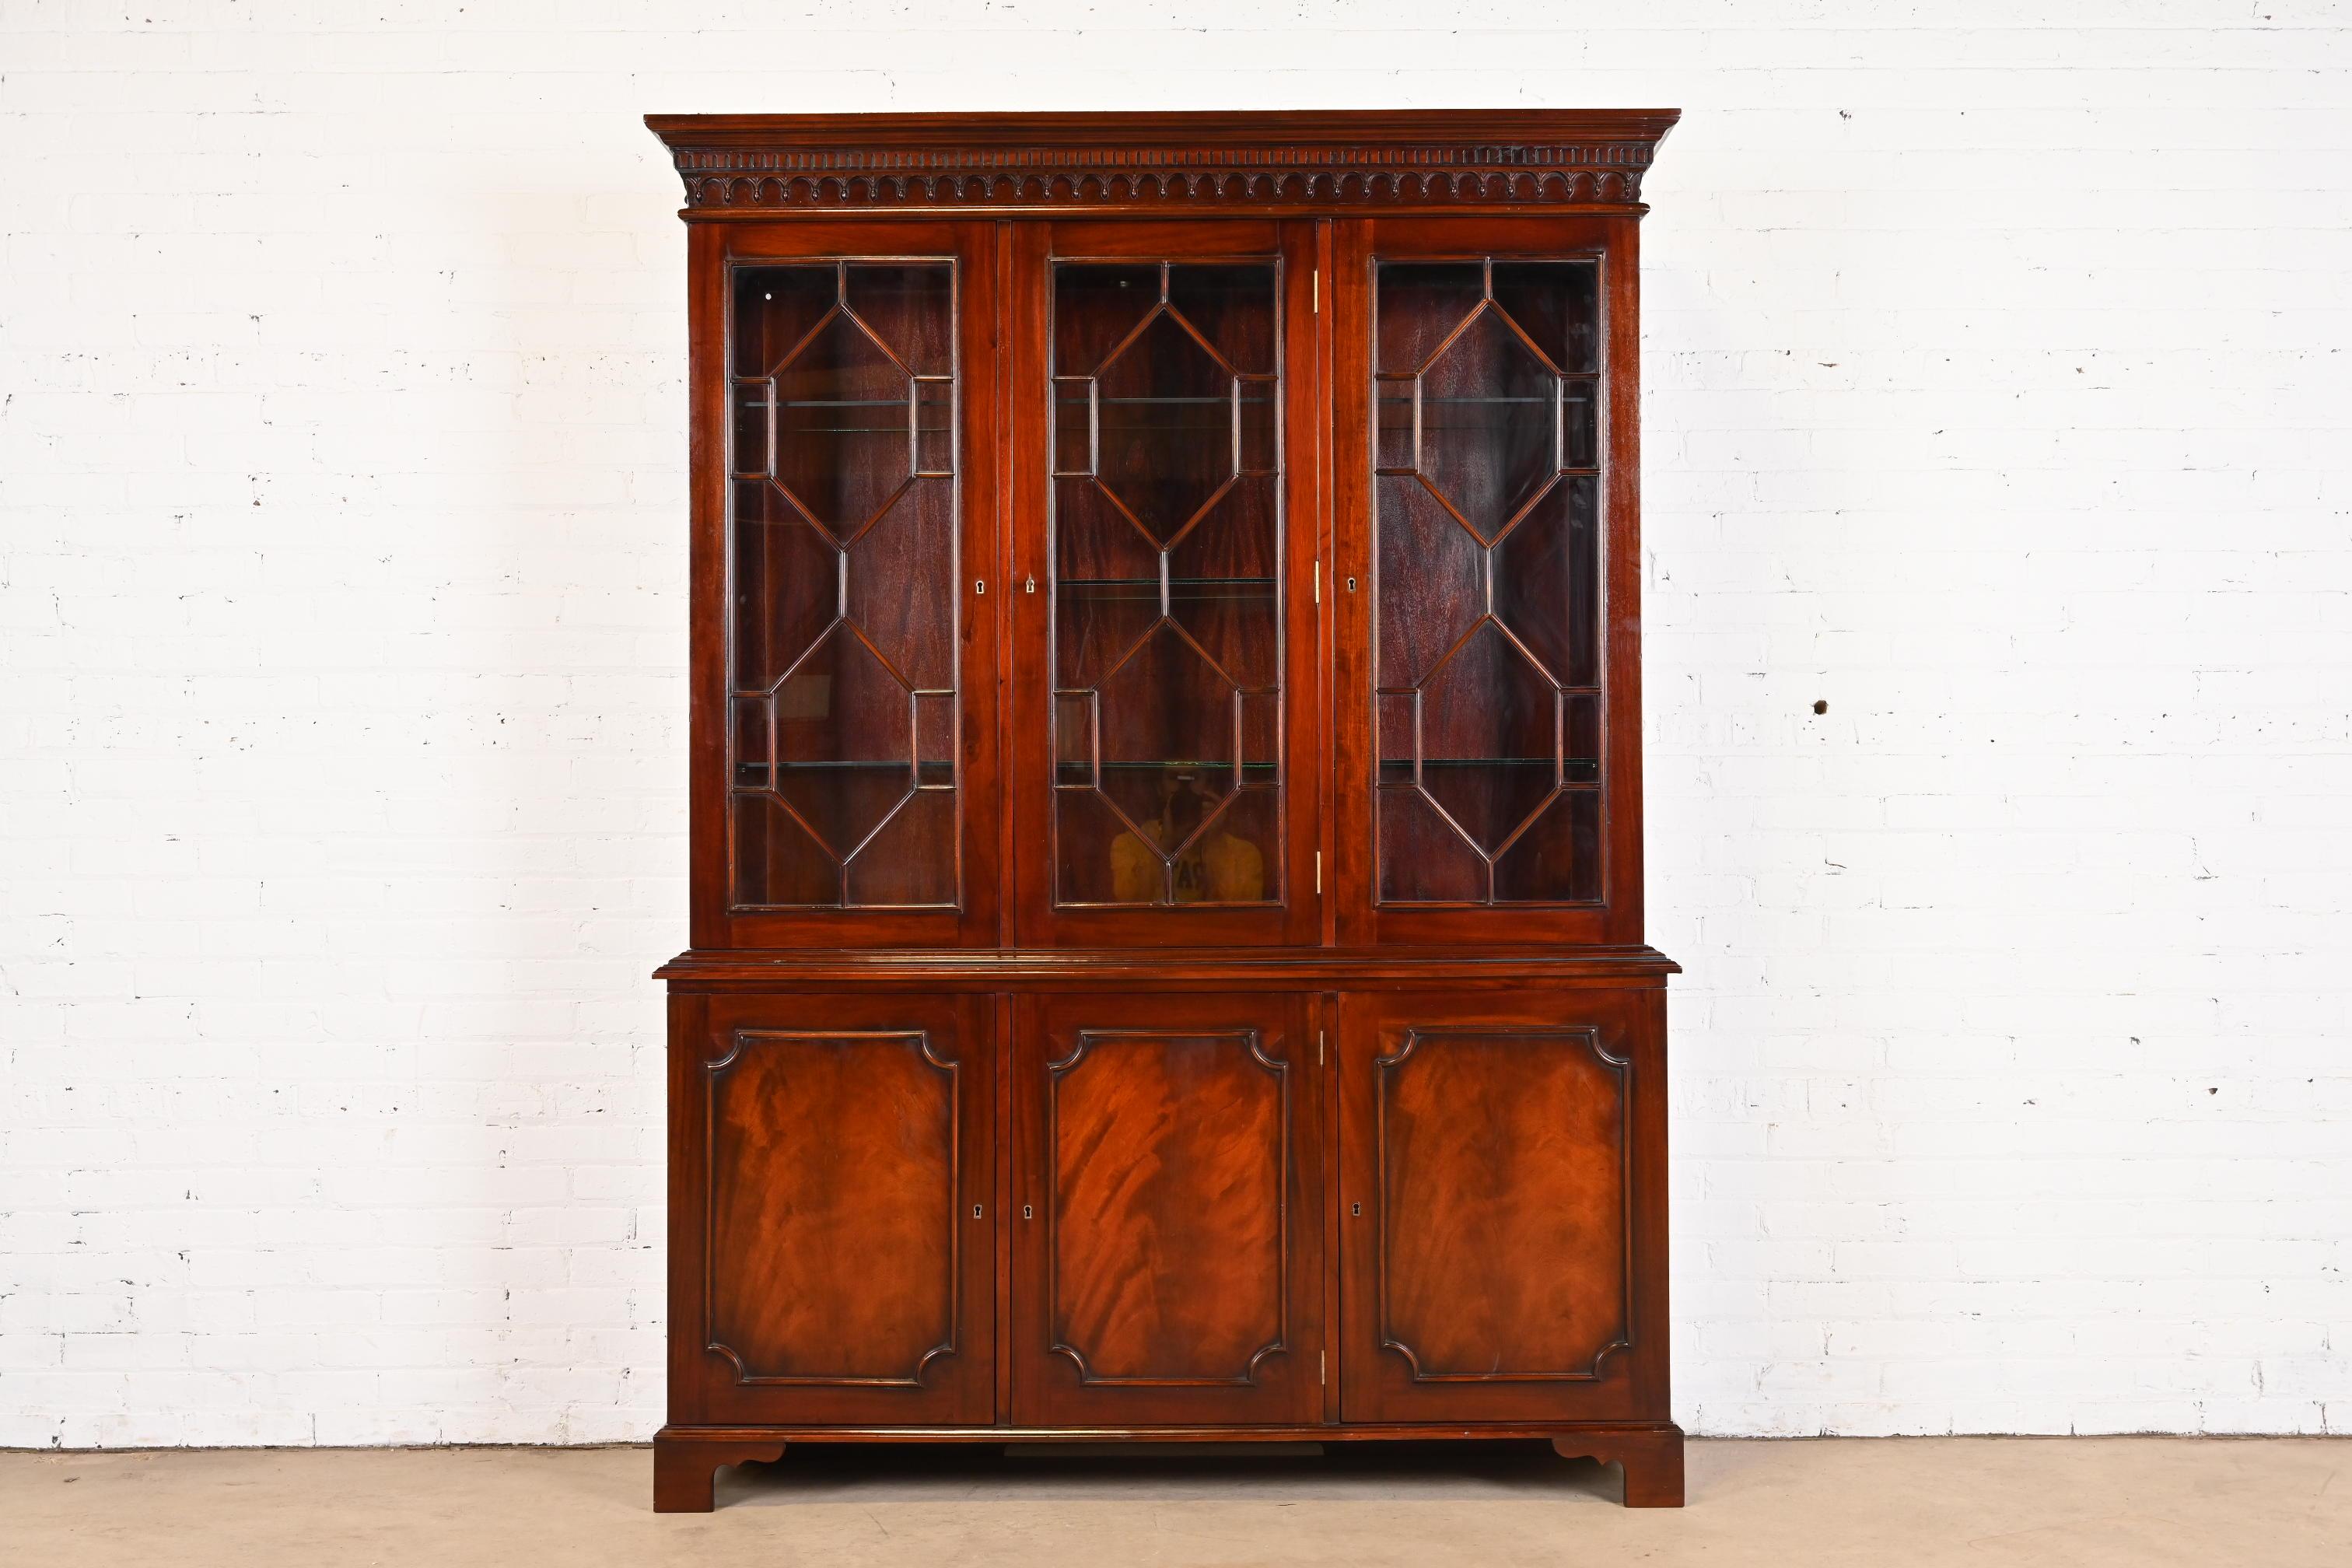 A gorgeous Georgian or Chippendale style breakfront bookcase or dining cabinet

In the manner of Baker Furniture

USA, Late 20th Century

Stunning carved flame mahogany, with mullioned glass front doors, and original brass hardware. Cabinets lock,